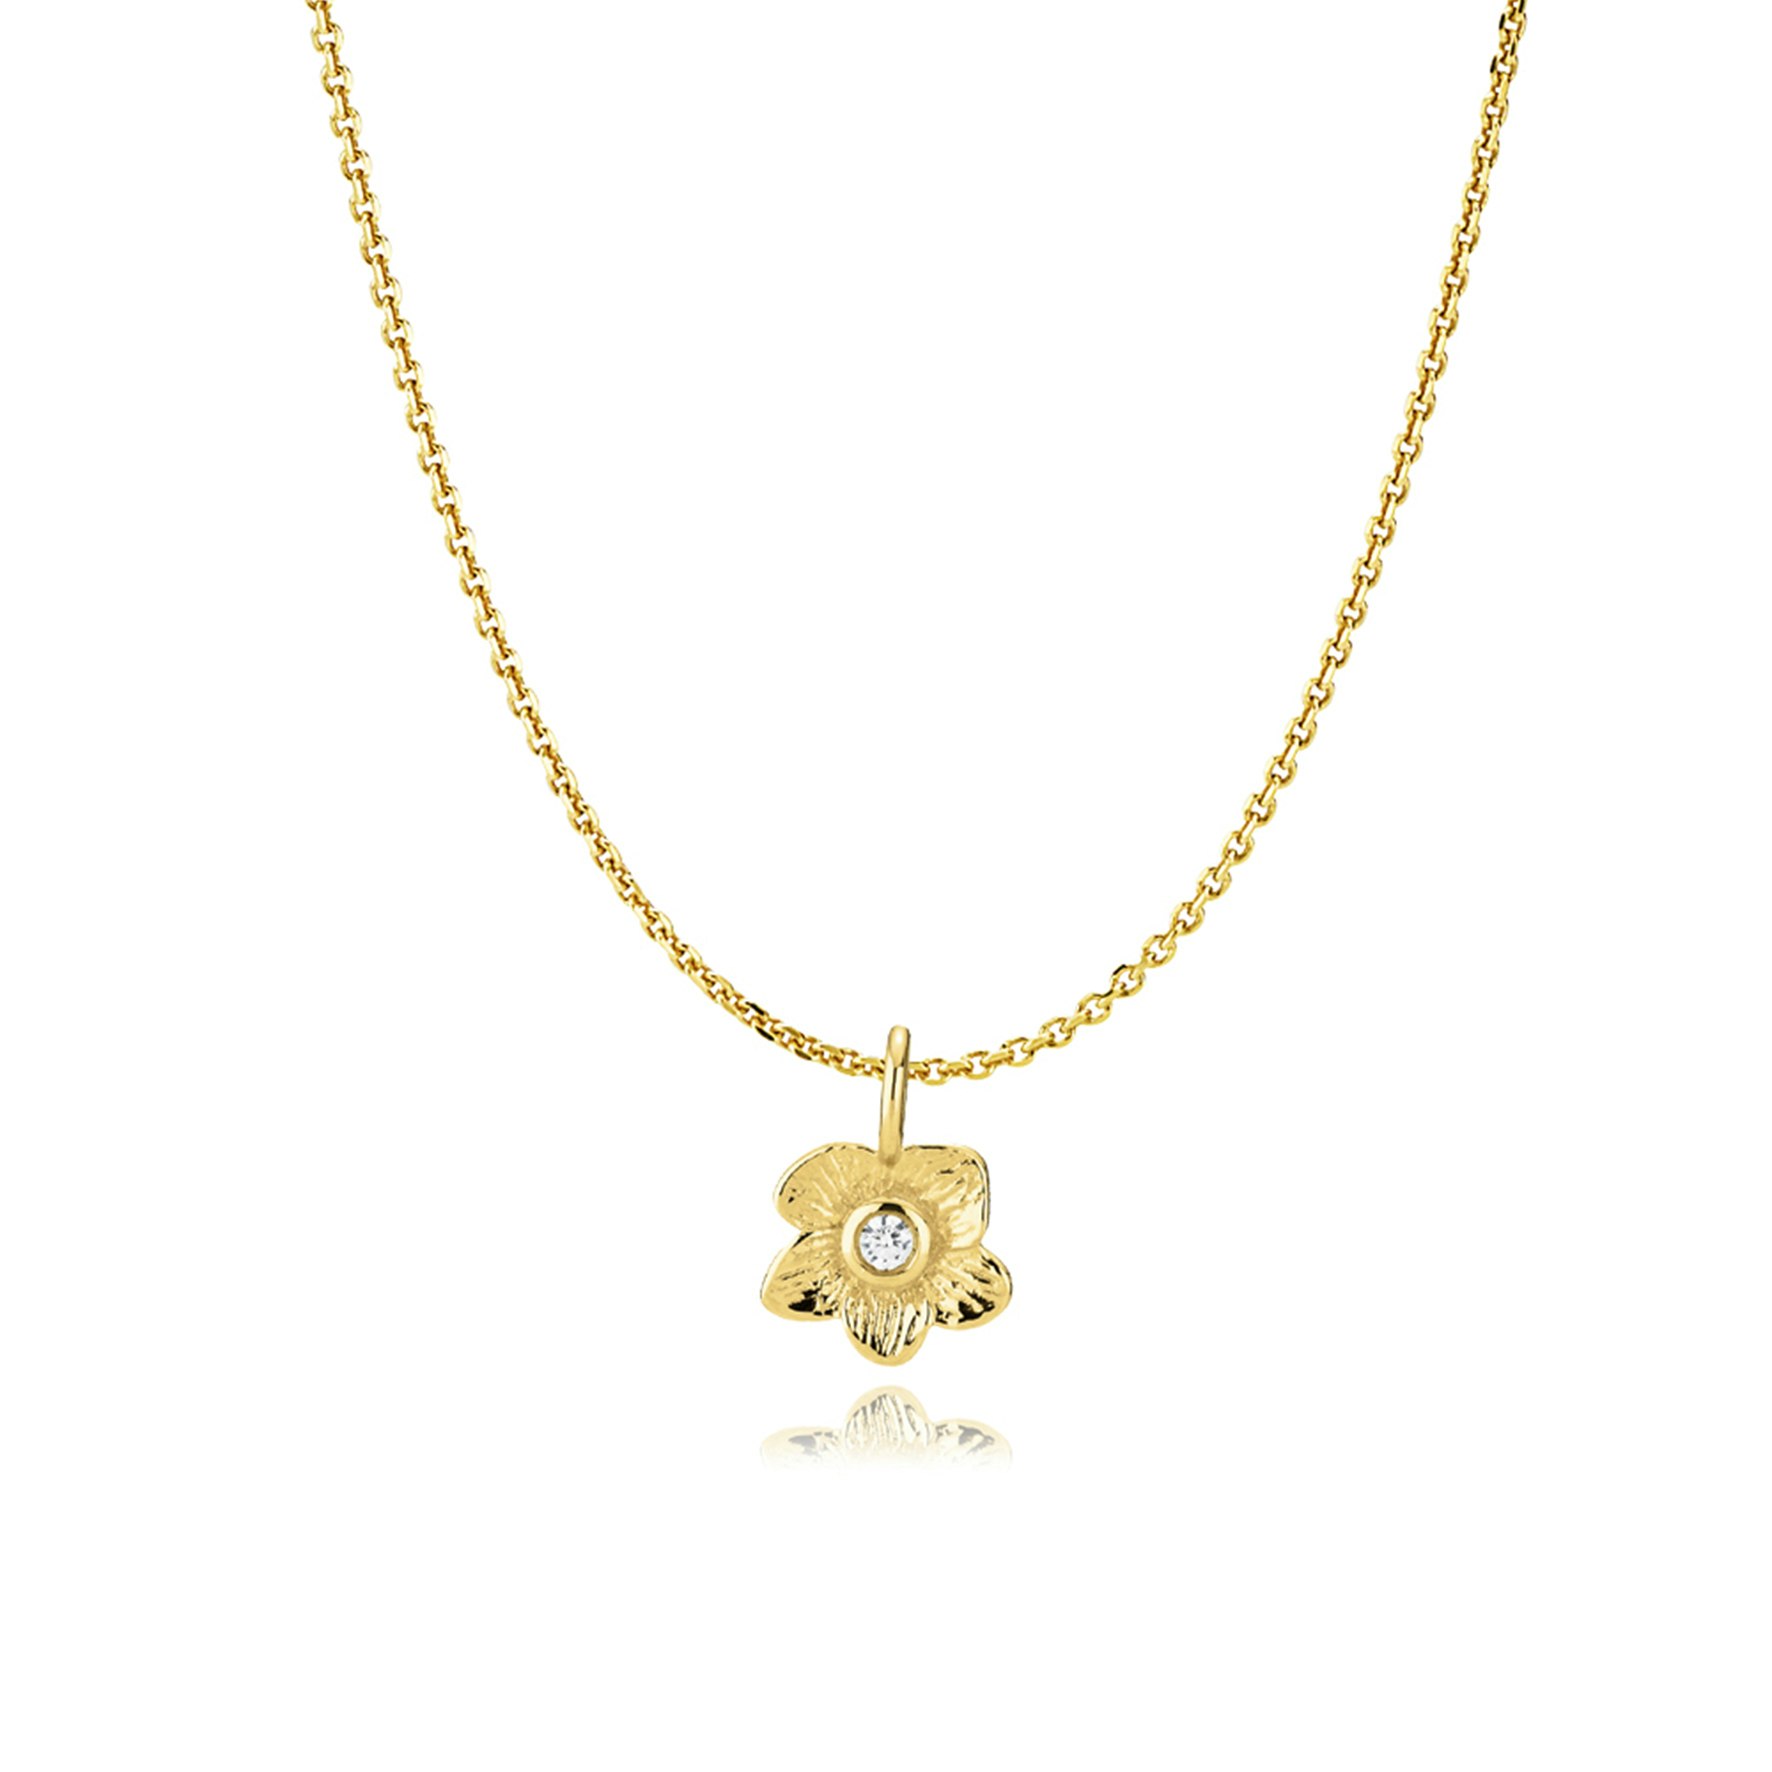 Rosa Necklace from Izabel Camille in Goldplated Silver Sterling 925